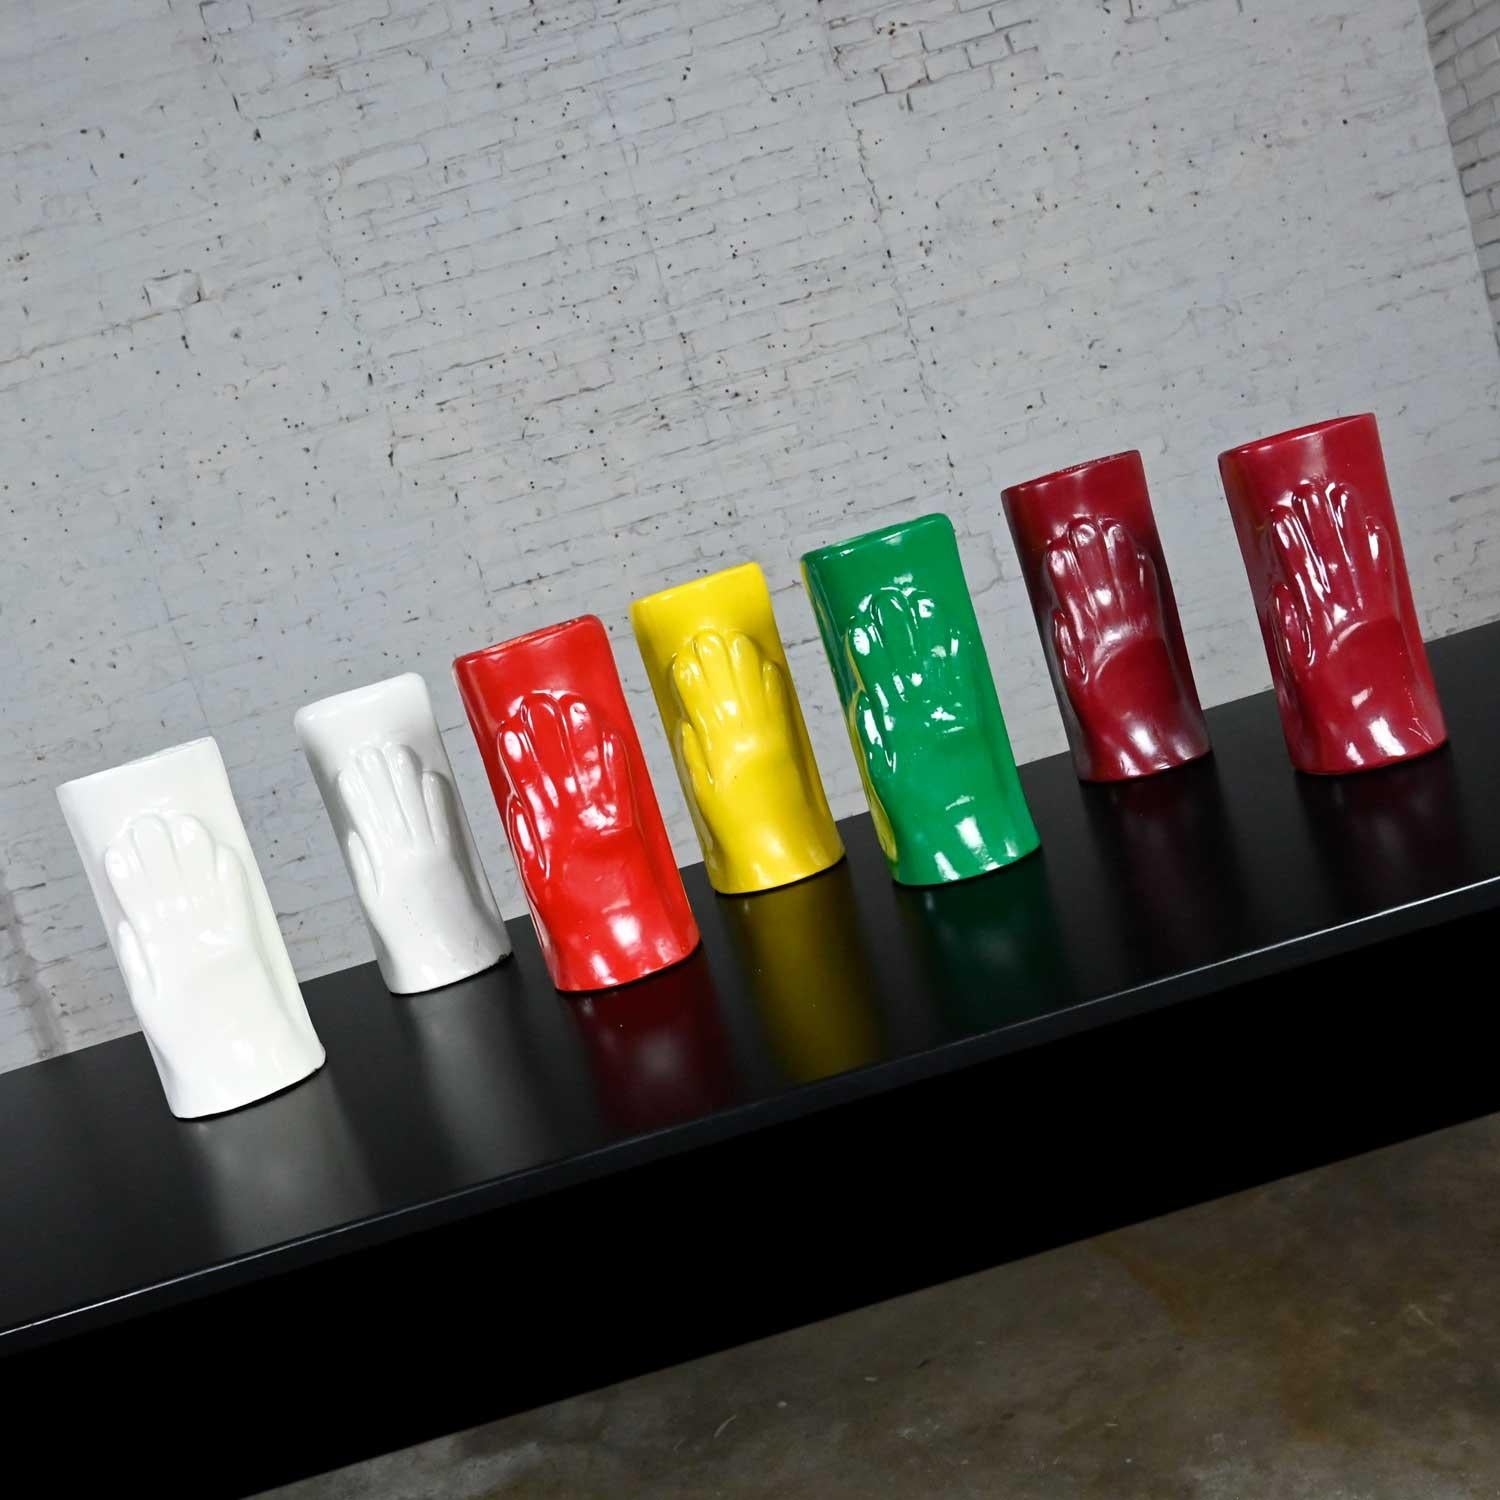 Folk Art Multi Color Molded Plastic or Acrylic Hand Vases Set of 7 For Sale 1